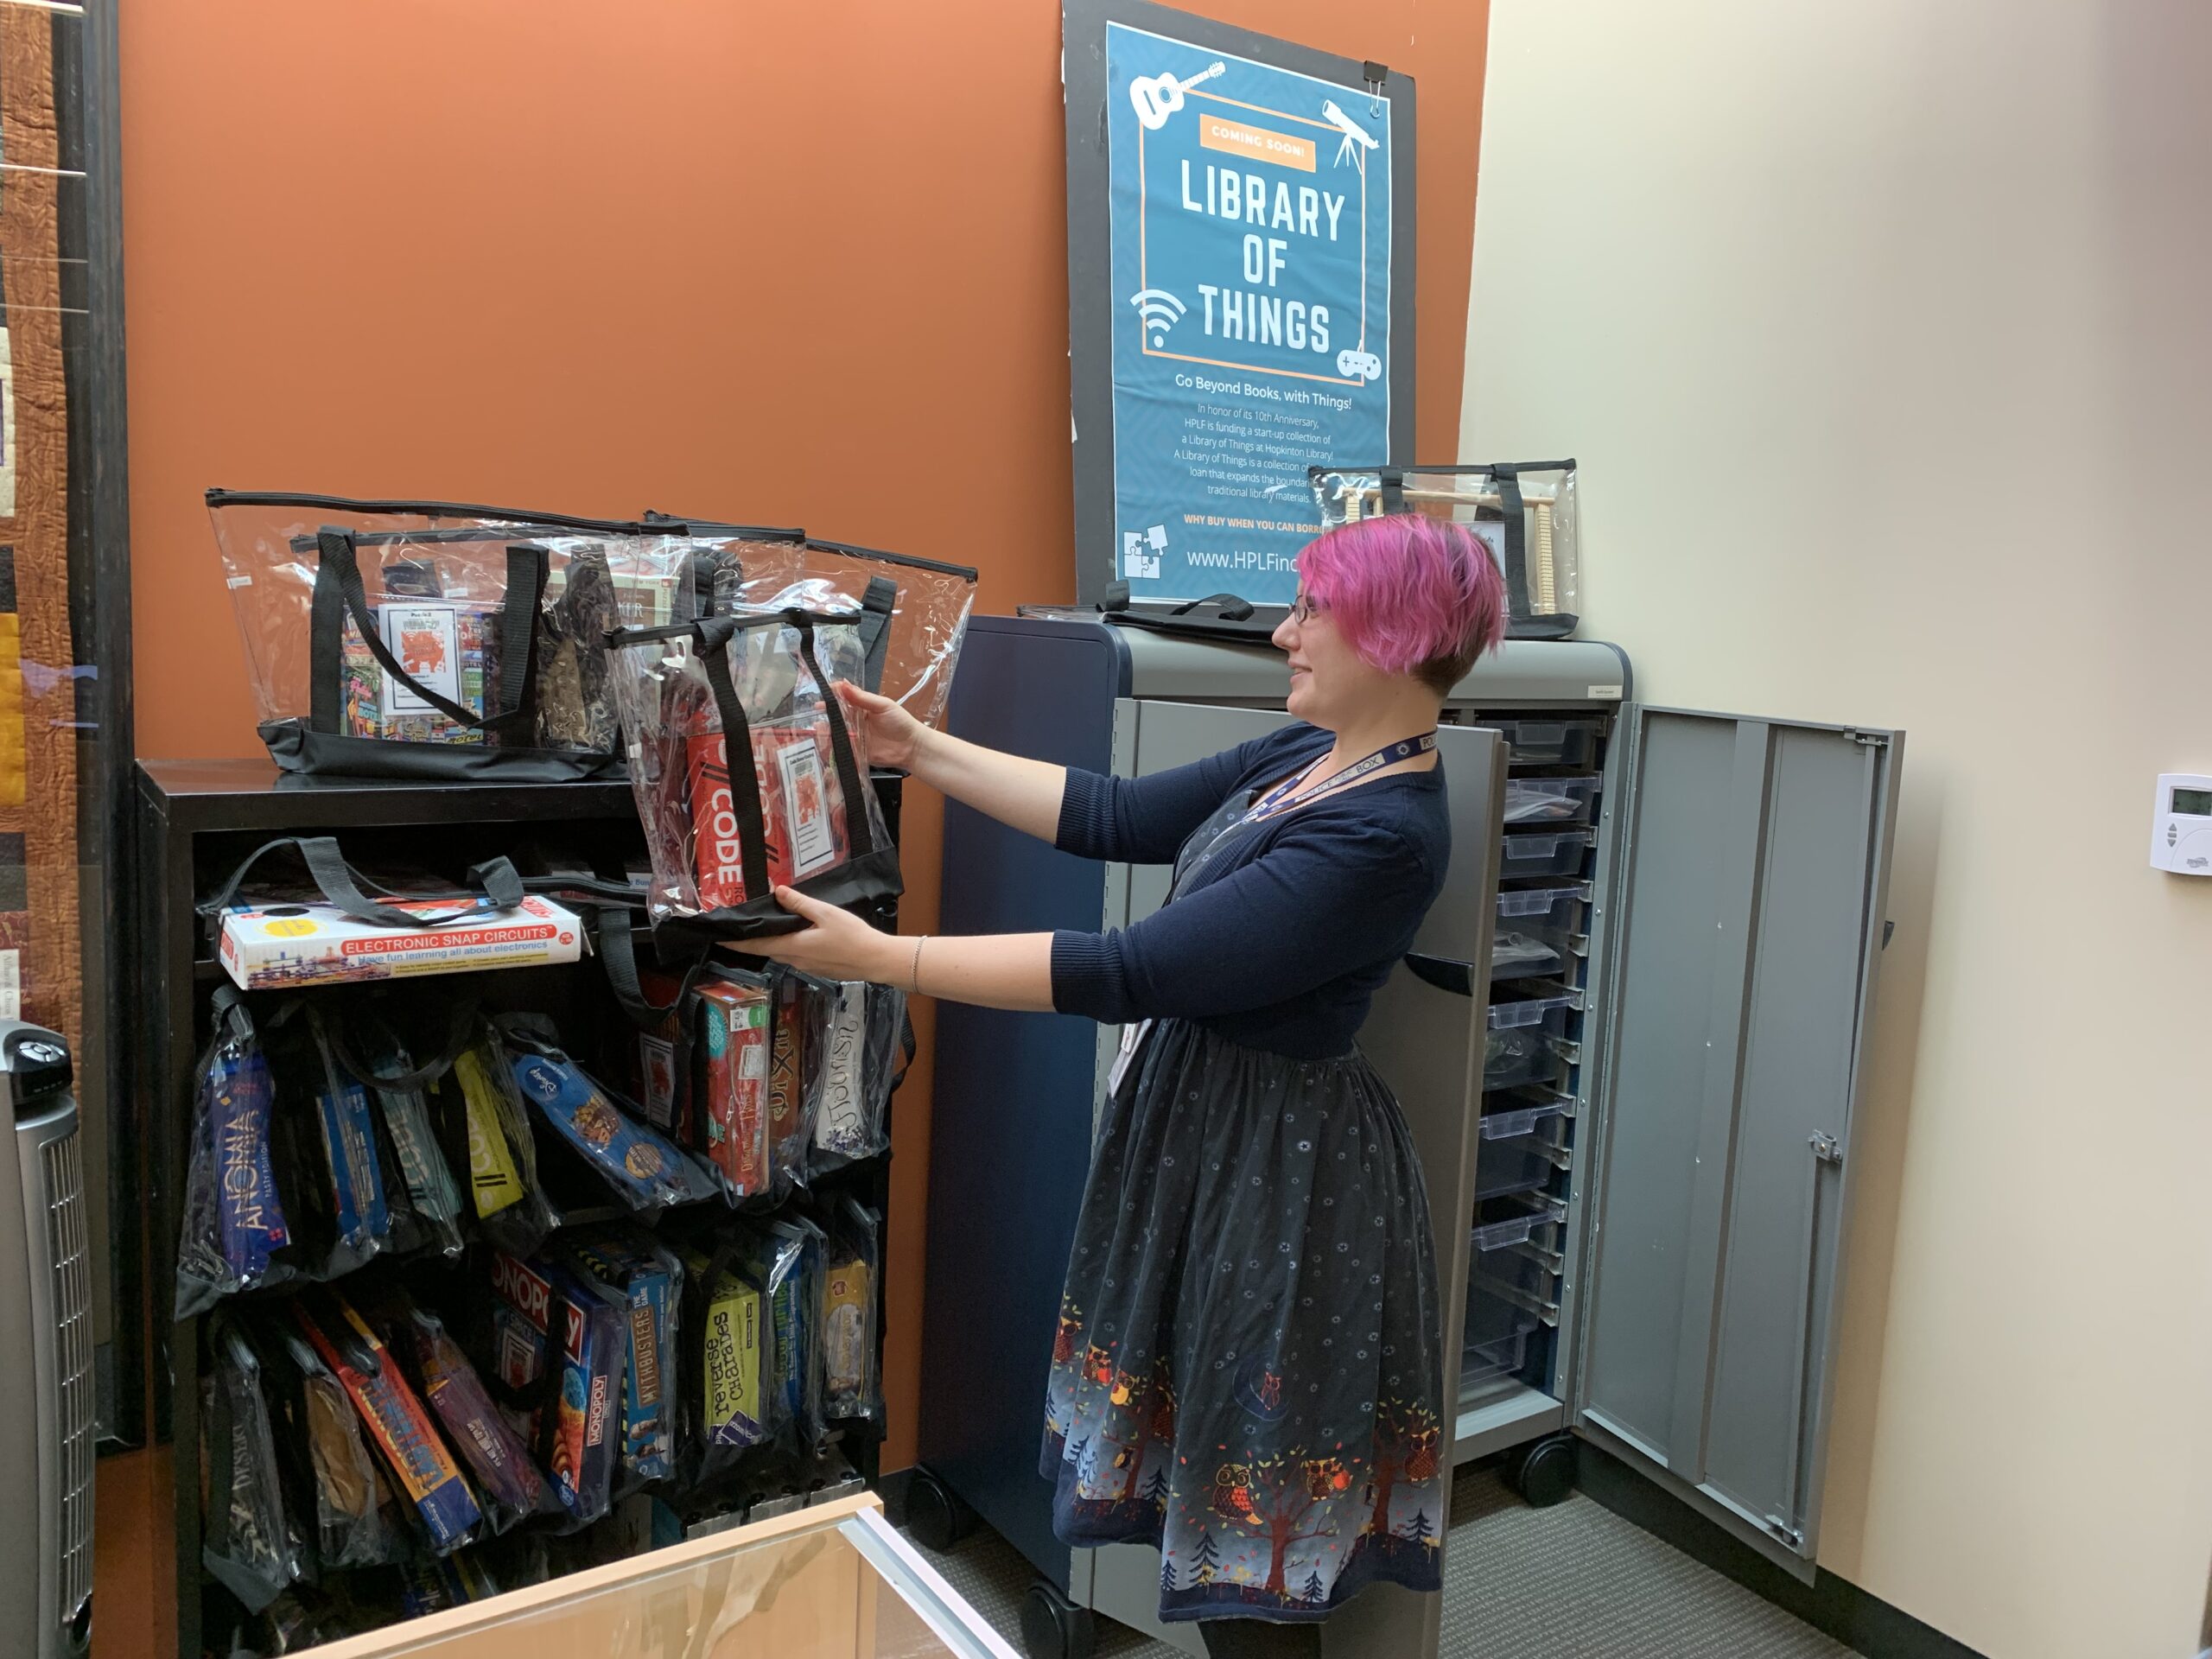 Independent Thoughts: Library of things lands in Hopkinton